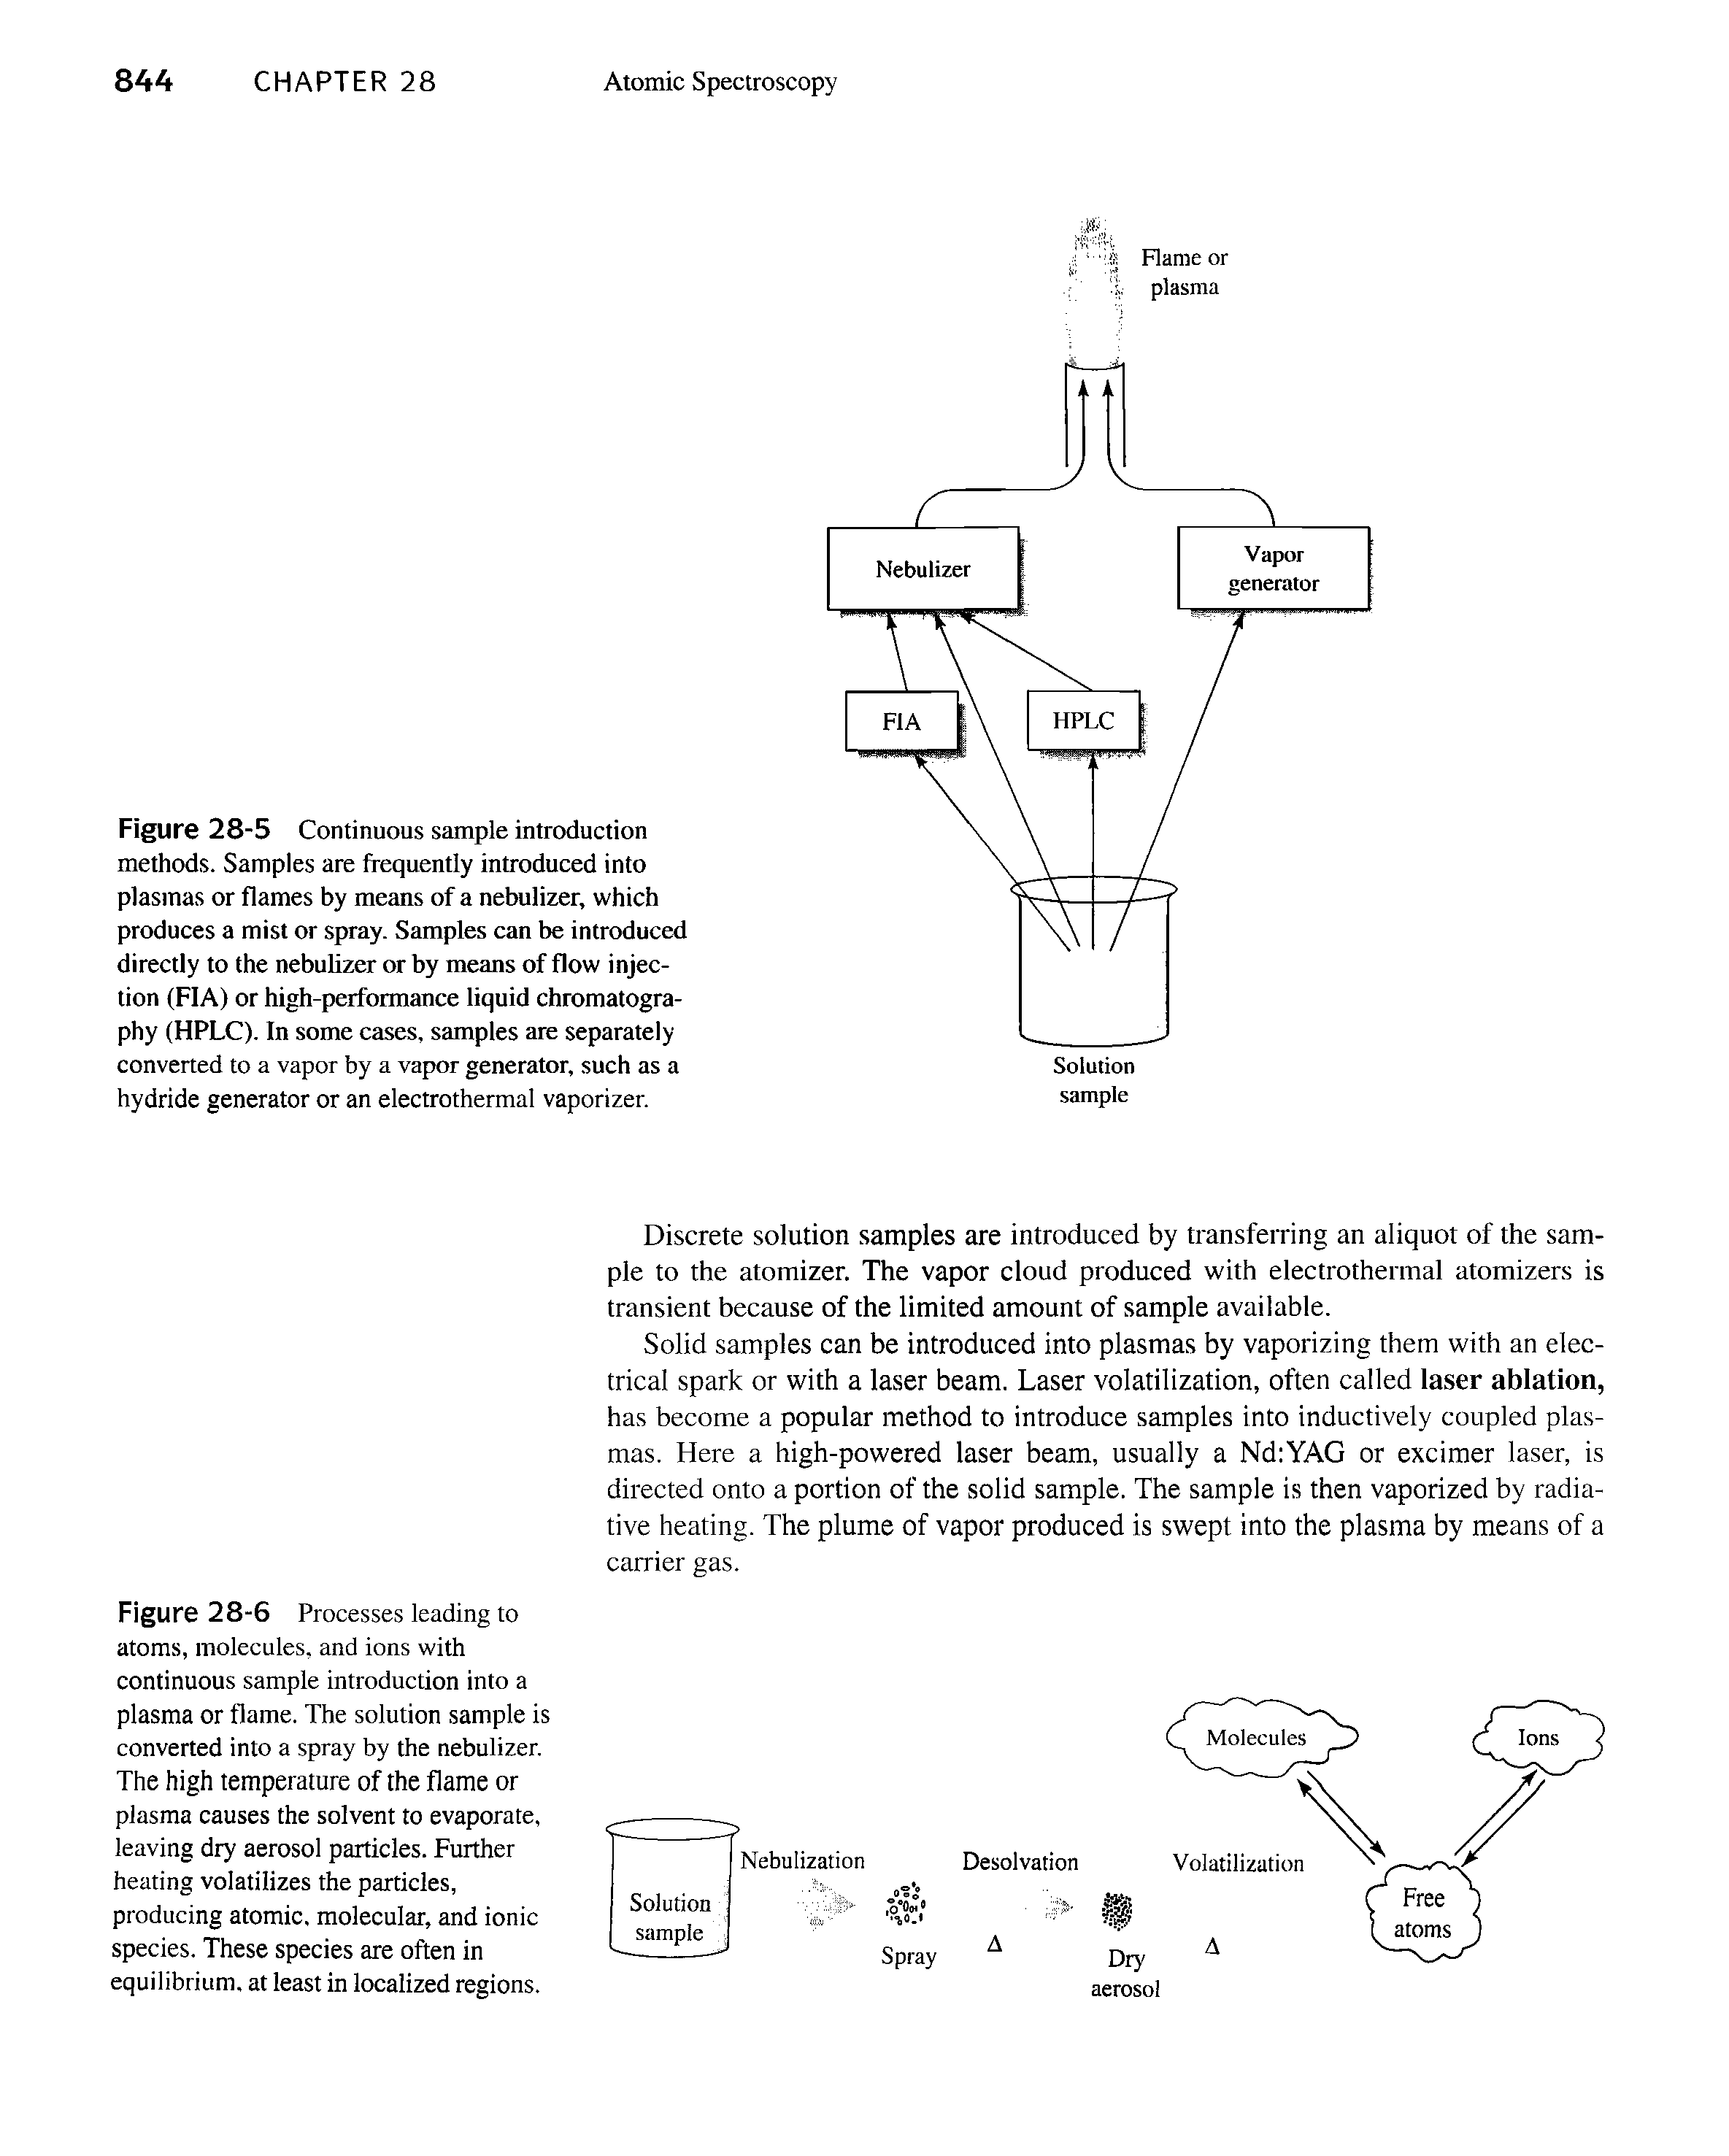 Figure 28-5 Continuous sample introduction methods. Samples are frequently introduced into plasmas or flames by means of a nebulizer, which produces a mist or spray. Samples can be introduced directly to the nebulizer or by means of flow injection (FIA) or high-performance liquid chromatography (HPLC). In some cases, samples are separately converted to a vapor by a vapor generator, such as a hydride generator or an electrothermal vaporizer.